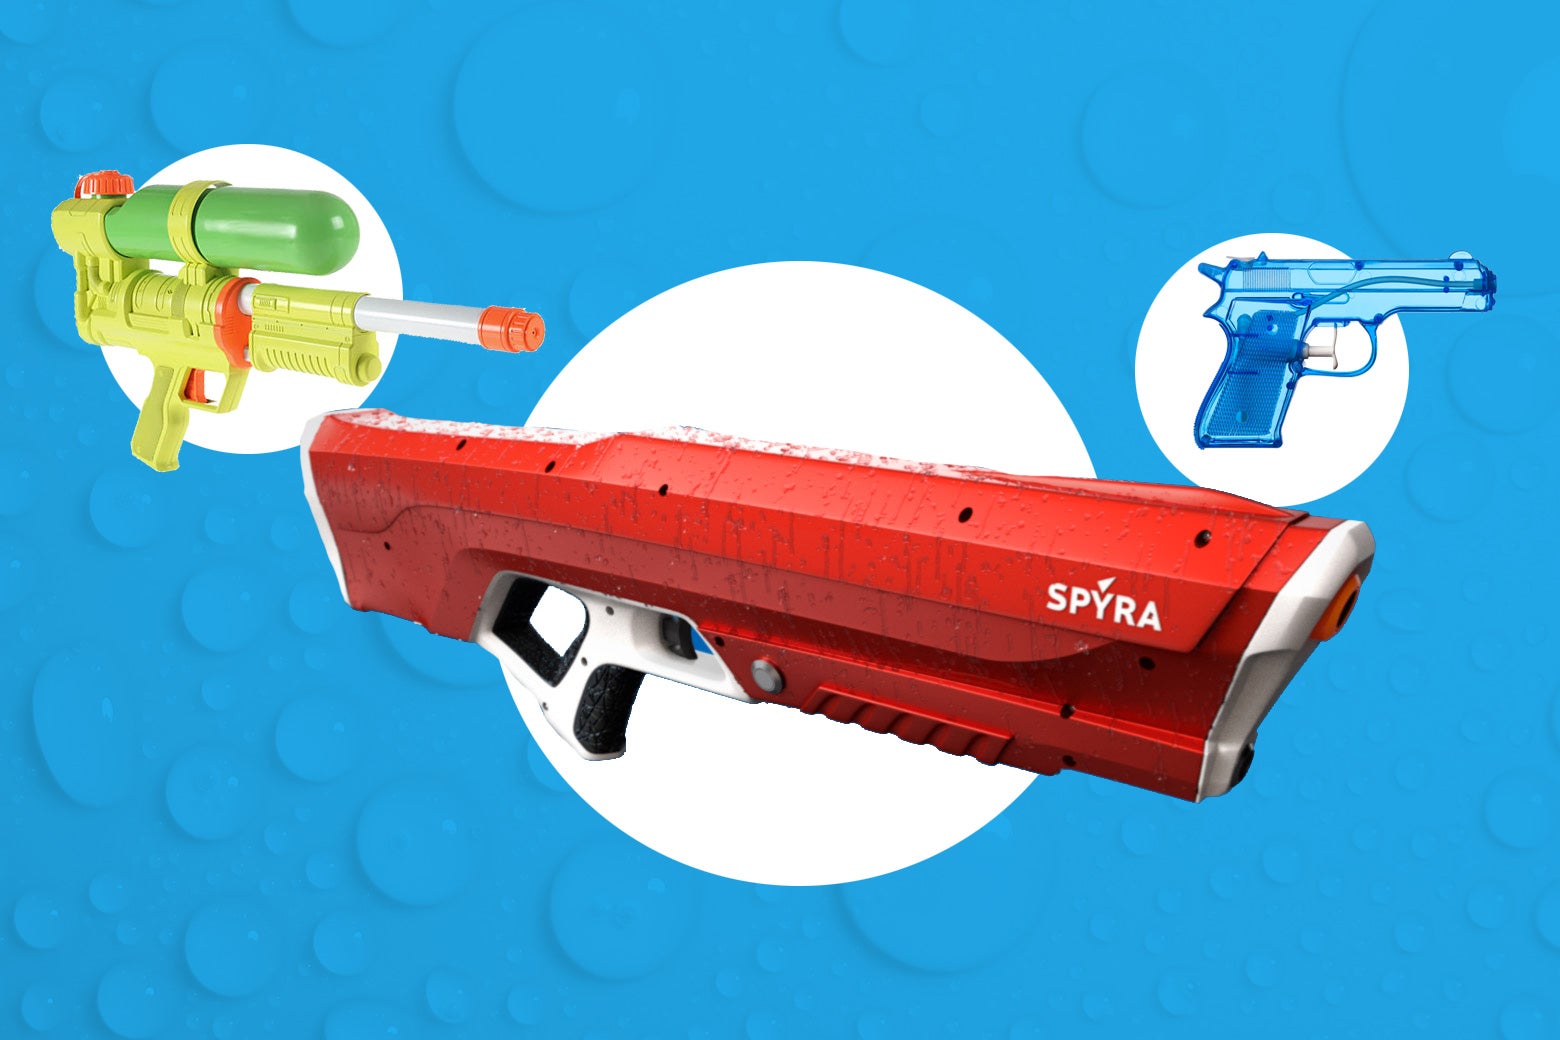 Spyra One – a whole lot of fun with an innovative water pistol